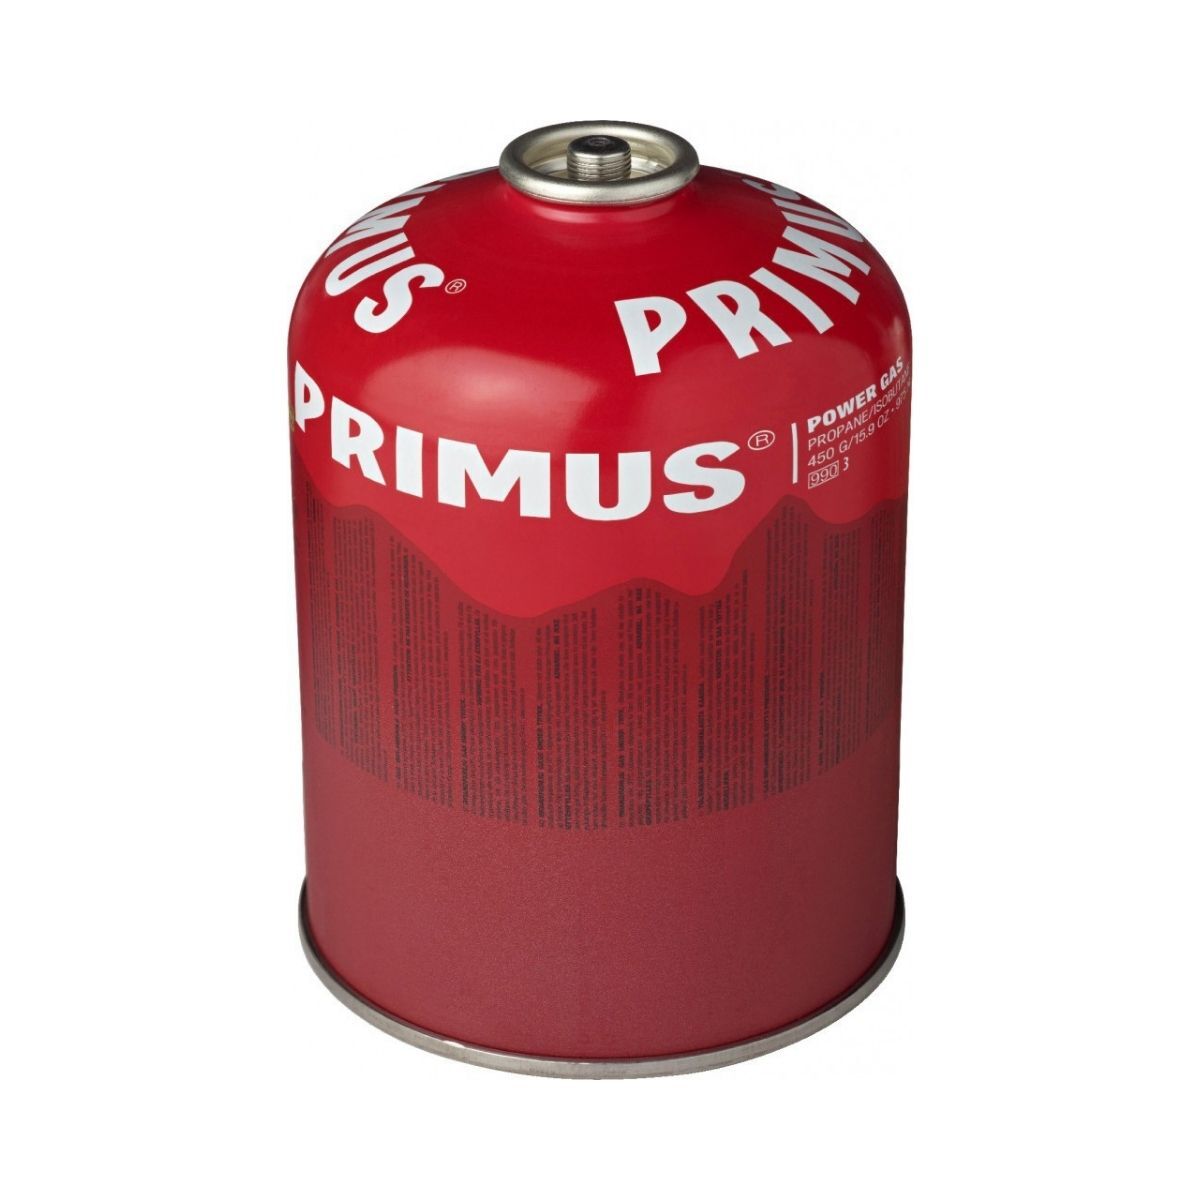 Primus Power Gas 450 g L2 - Gas canister